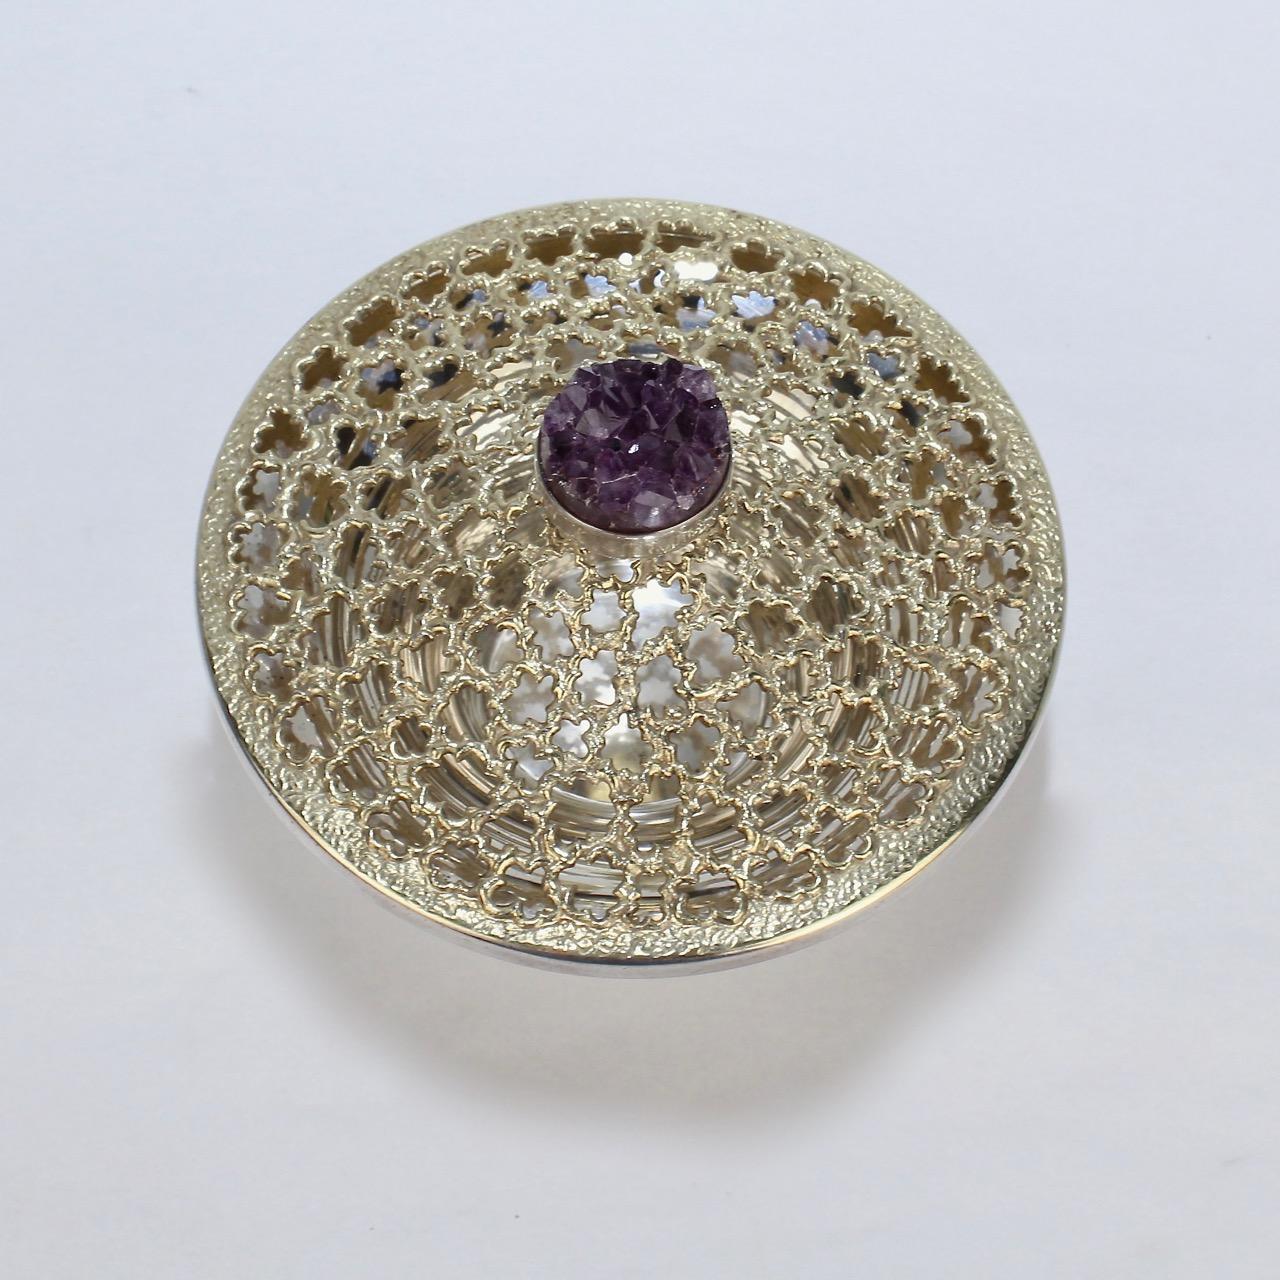 Vintage Stuart Devlin Sterling Silver and Amethyst Reticulated Covered Posy Bowl 5